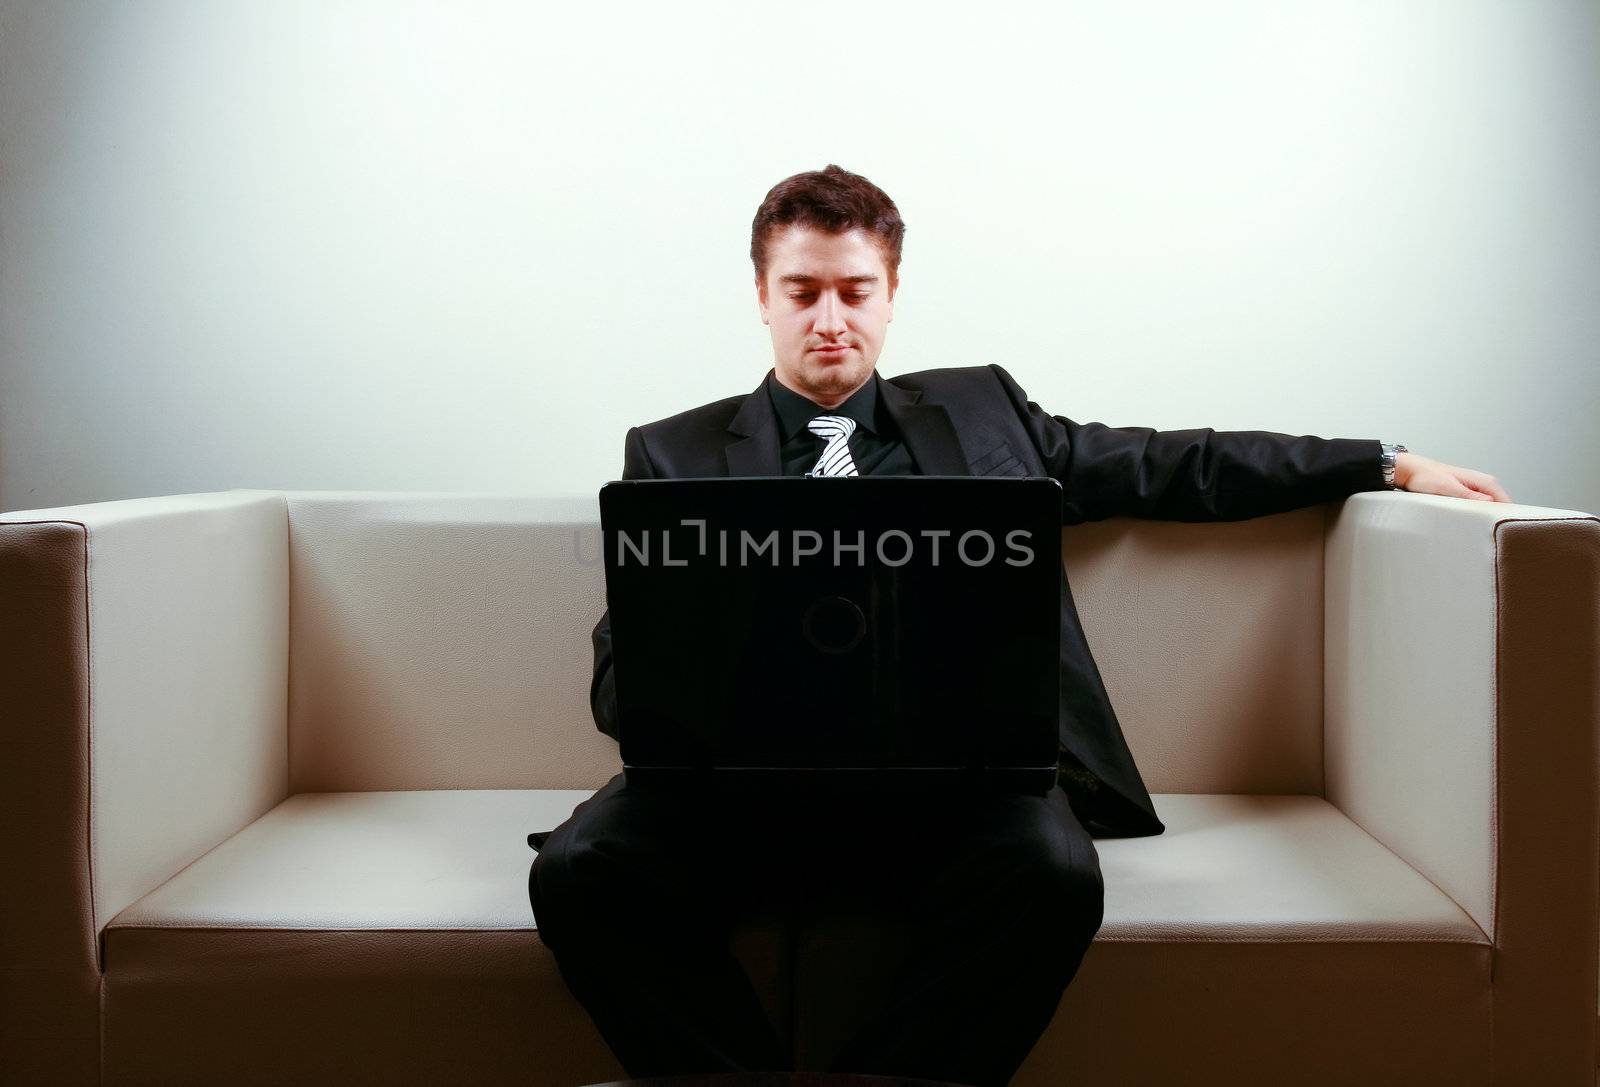 Businessman on lounge holding a laptop